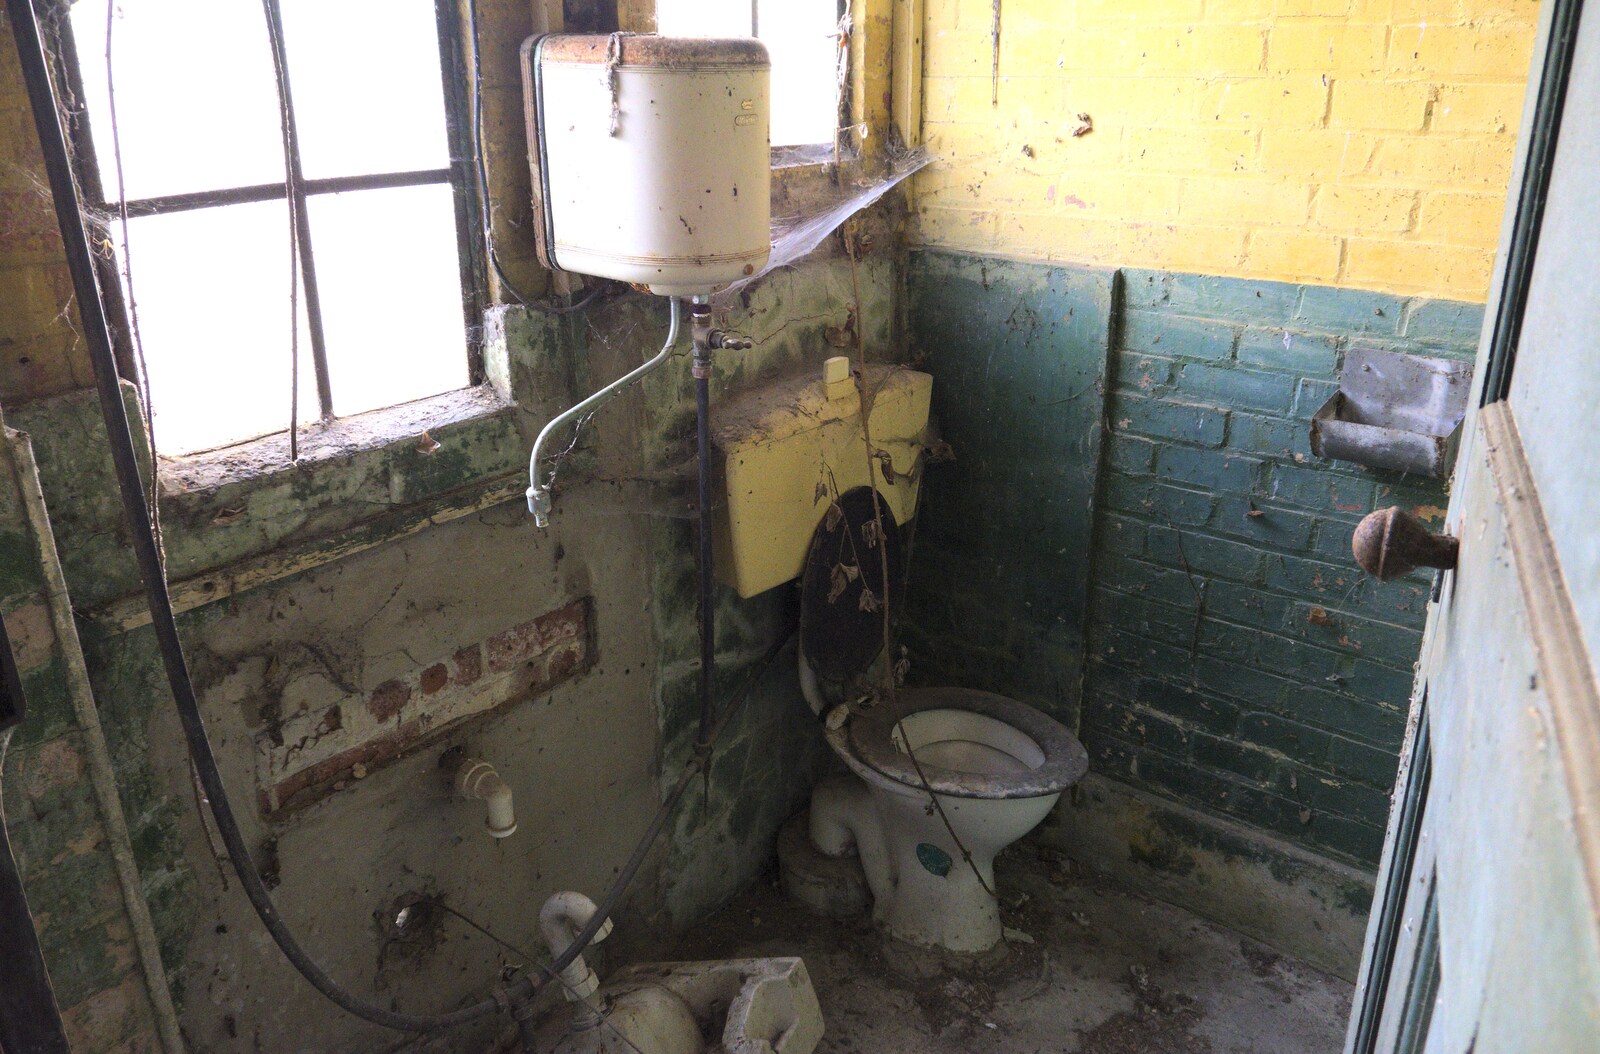 A 70s cistern on an original toilet from A 1940s Timewarp, Site 4, Bungay Airfield, Flixton, Suffolk - 9th June 2022